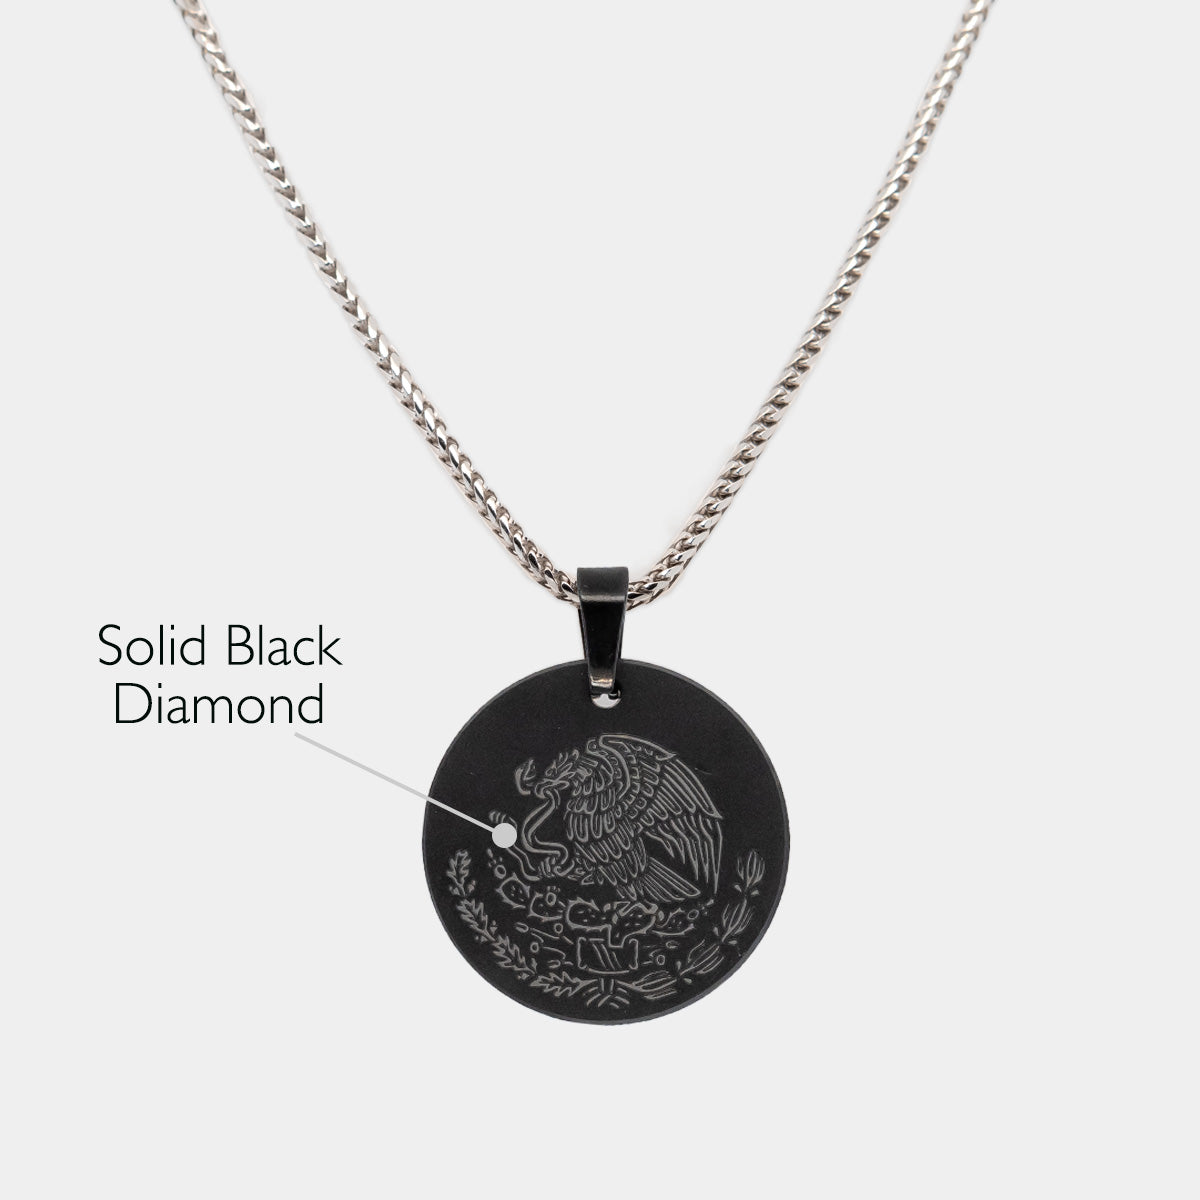 Limited Edition Black Diamond - Collections